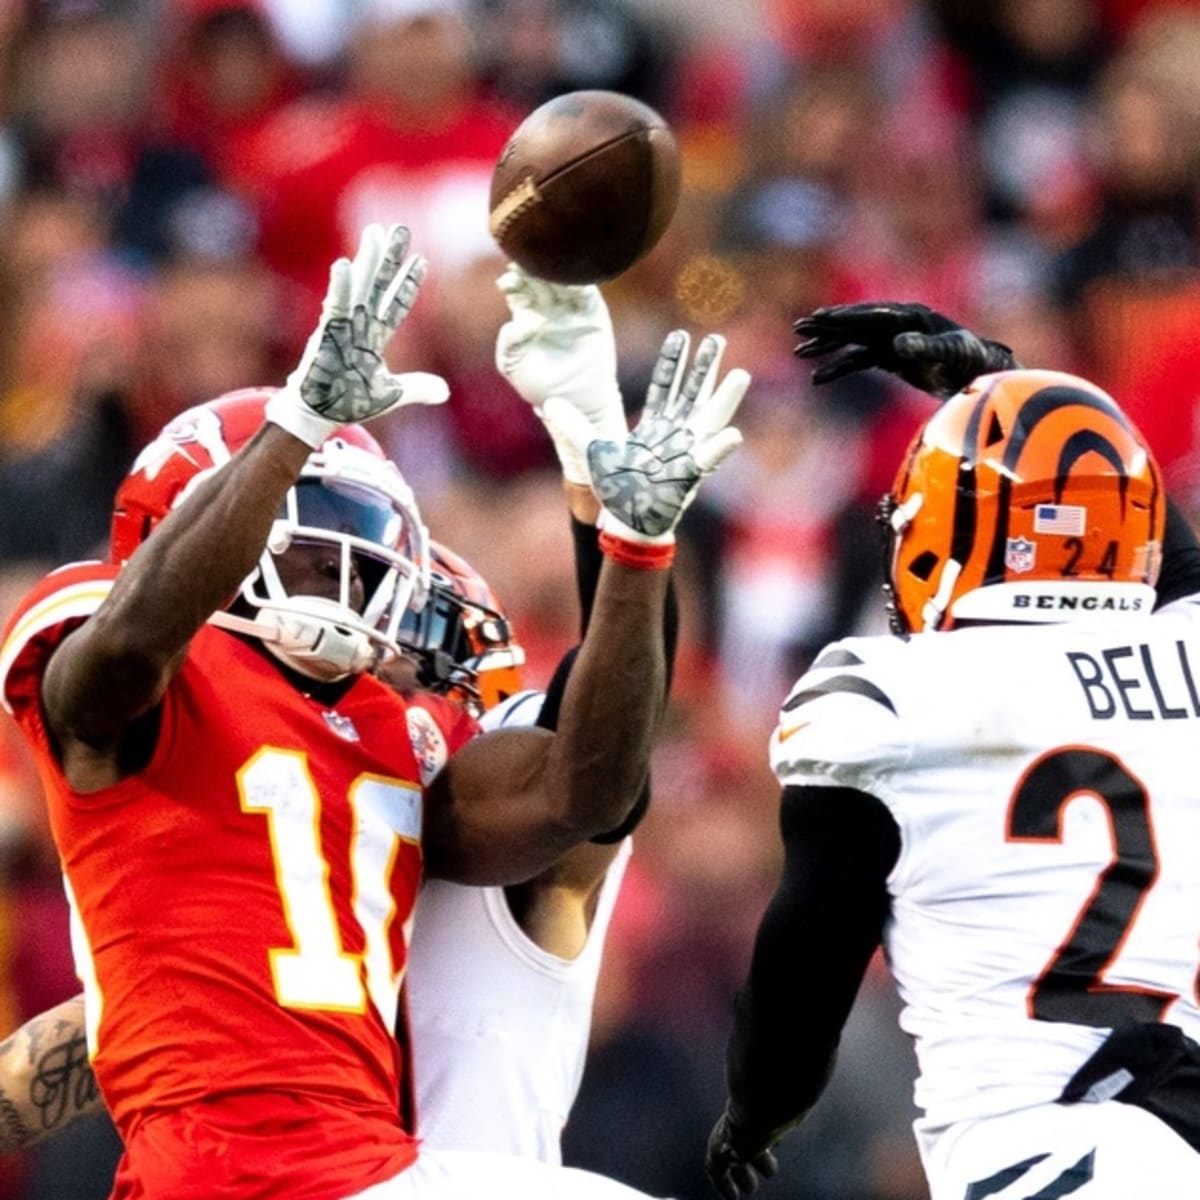 Bengals Beat Kansas City to Advance to the Super Bowl - The New